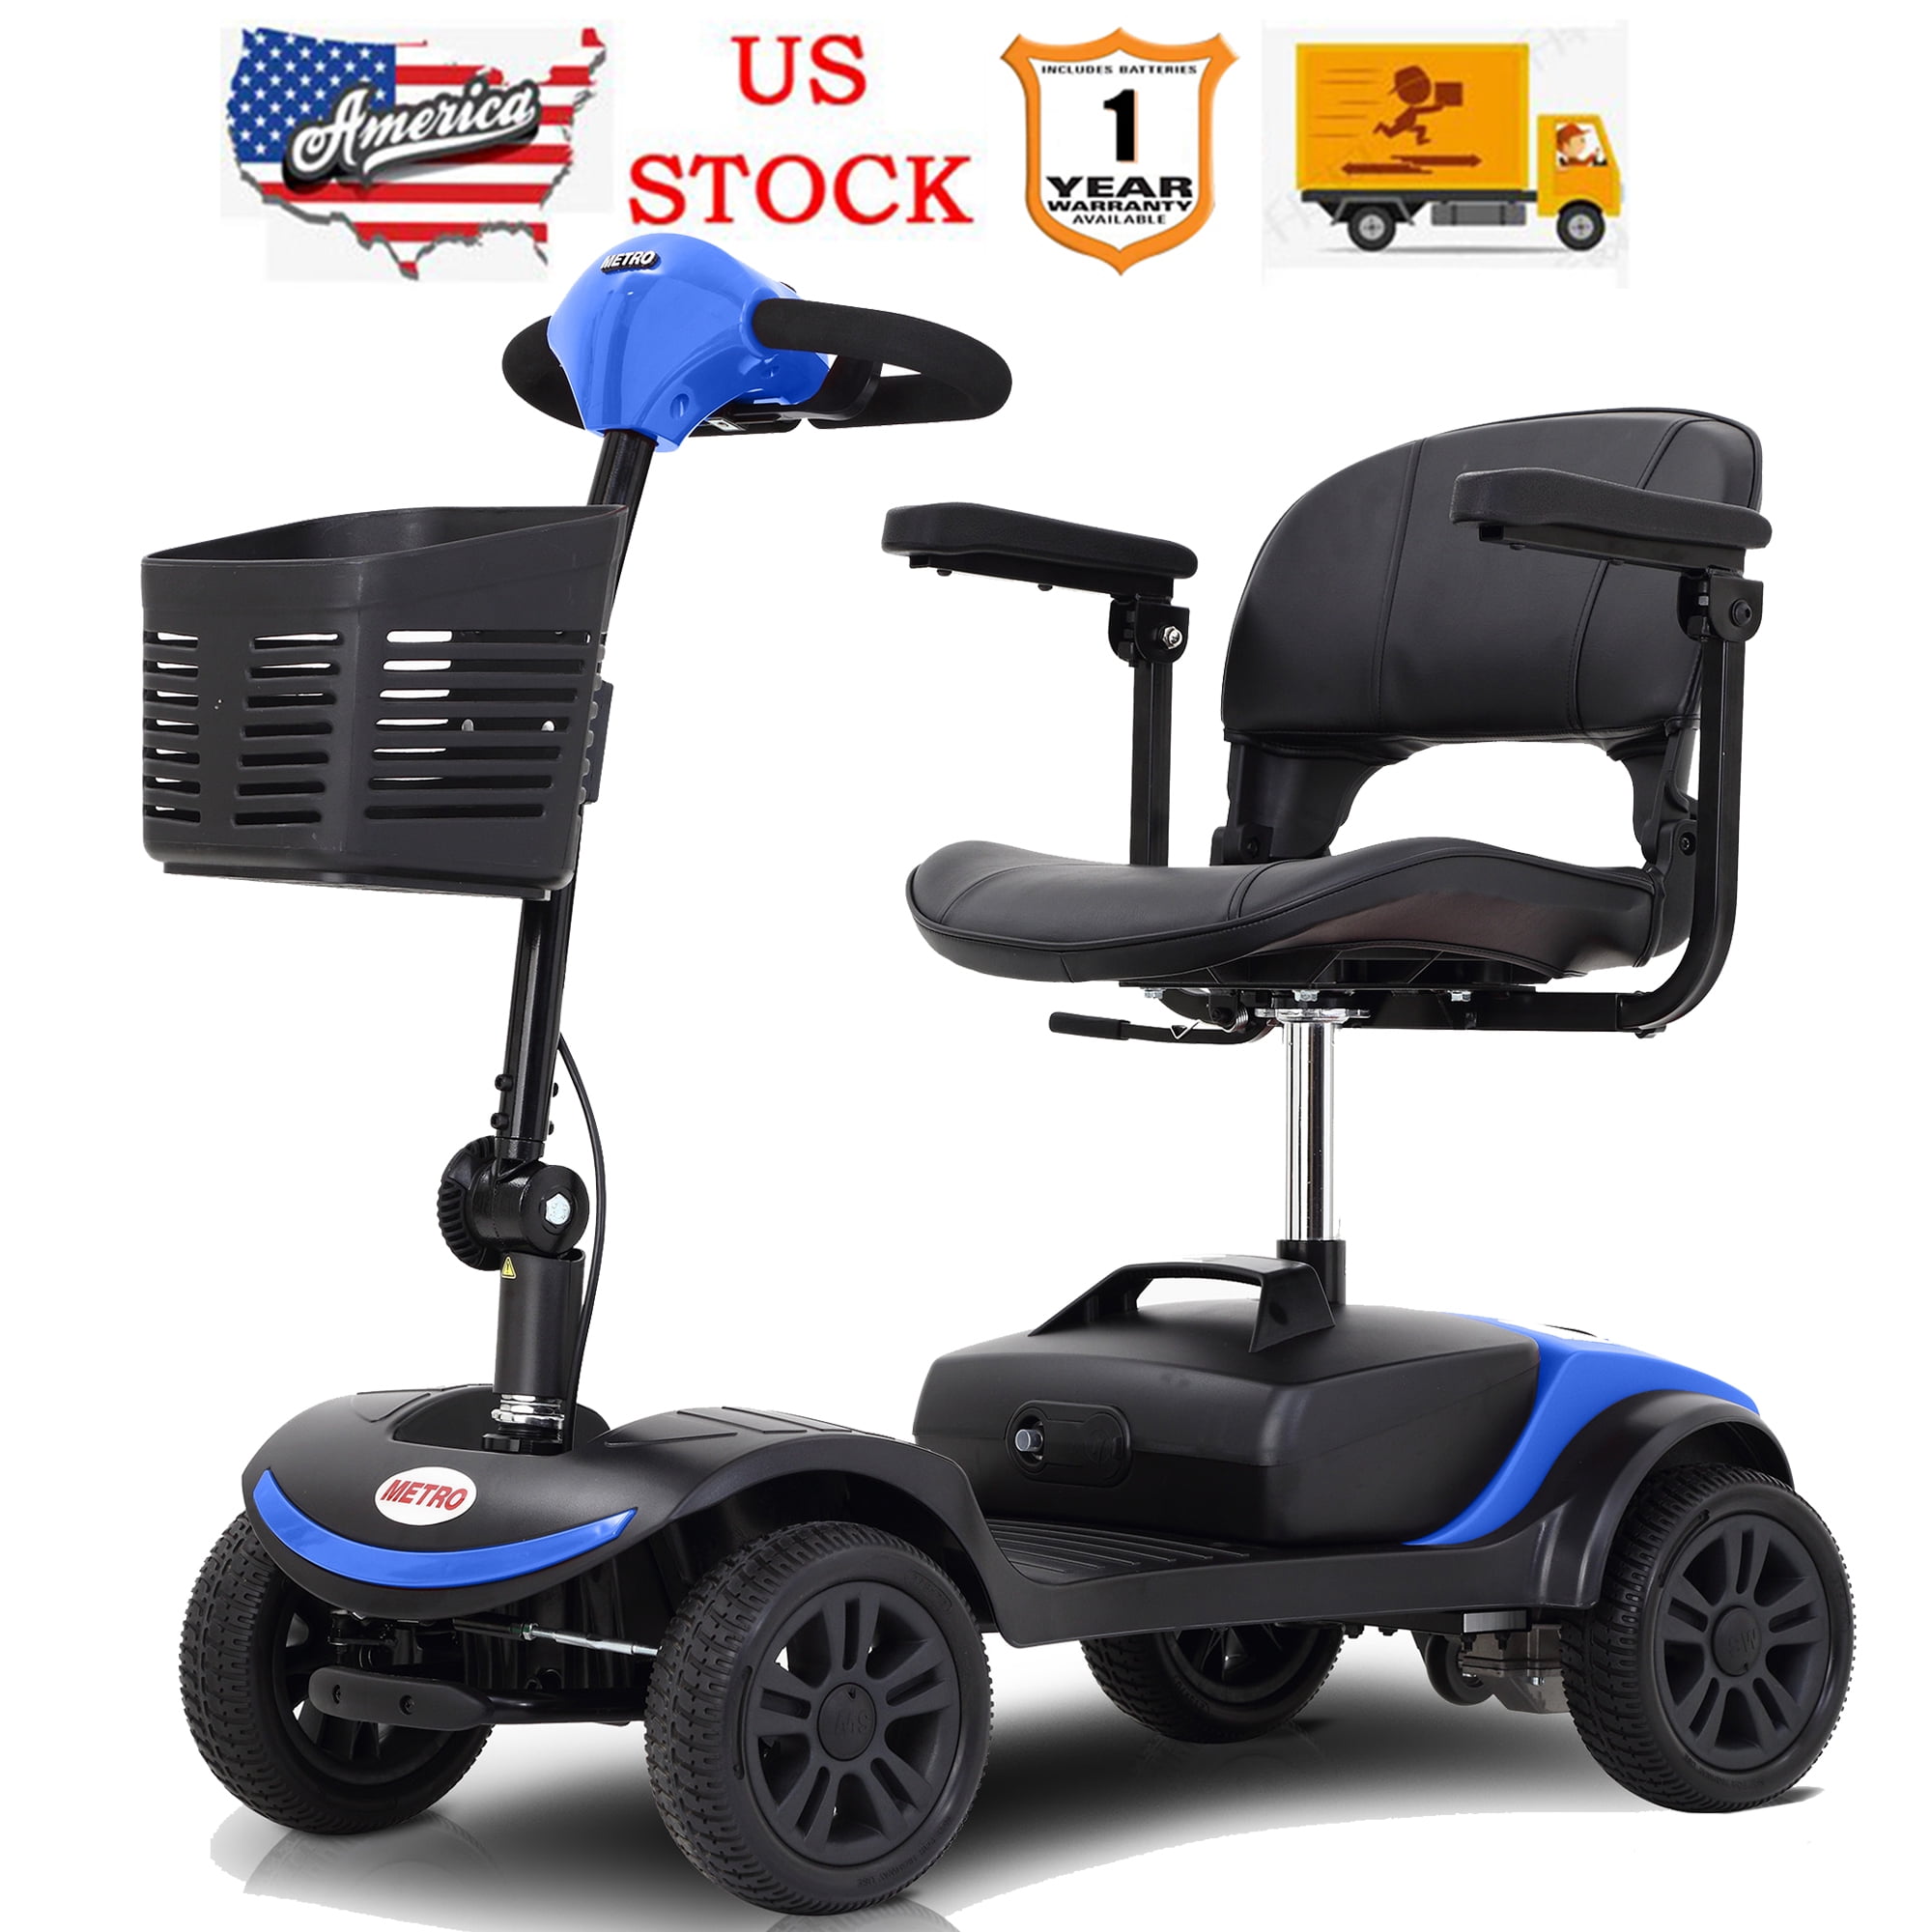 4 Wheel Mobility Scooter, Heavy Duty Electric Motorized Scooters Seniors, Long Travel Lightweight Compact Scooter with 360° Swivel Seat, Outdoor Power With Anti-Tip Tires, SS553 - Walmart.com